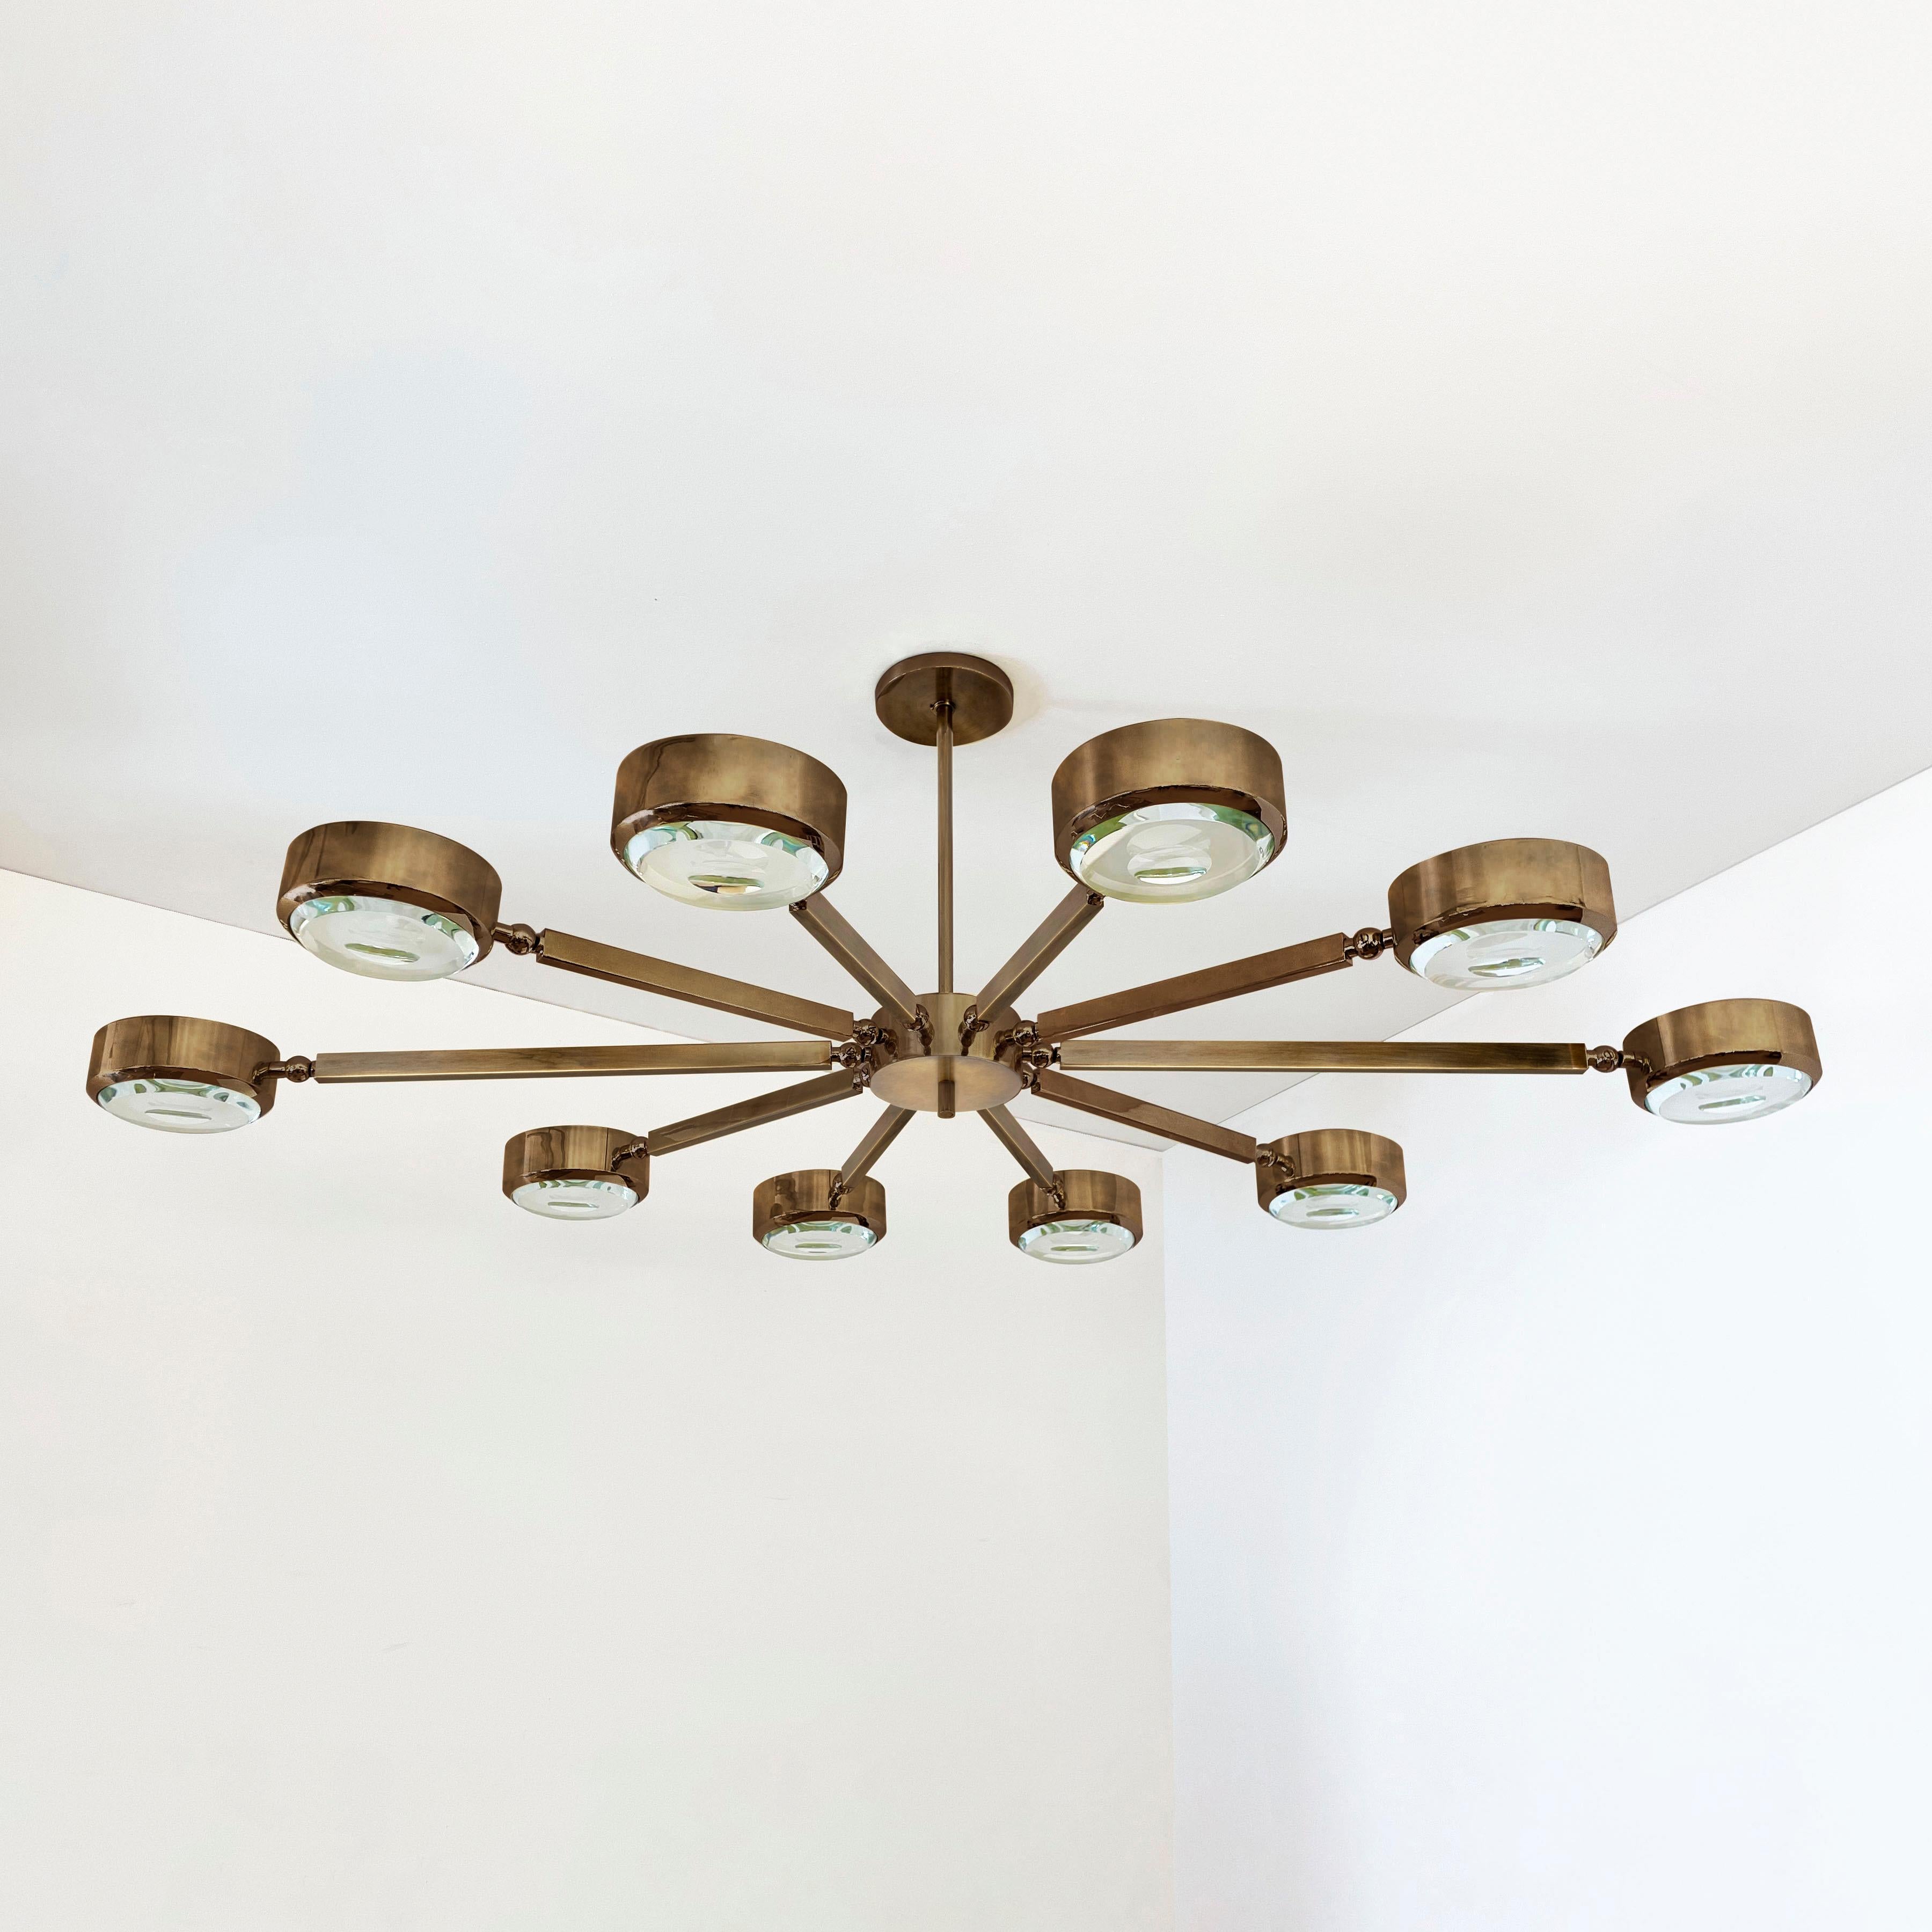 Italian Oculus Oval Ceiling Light by Gaspare Asaro- Polished Nickel with Carved Glass For Sale